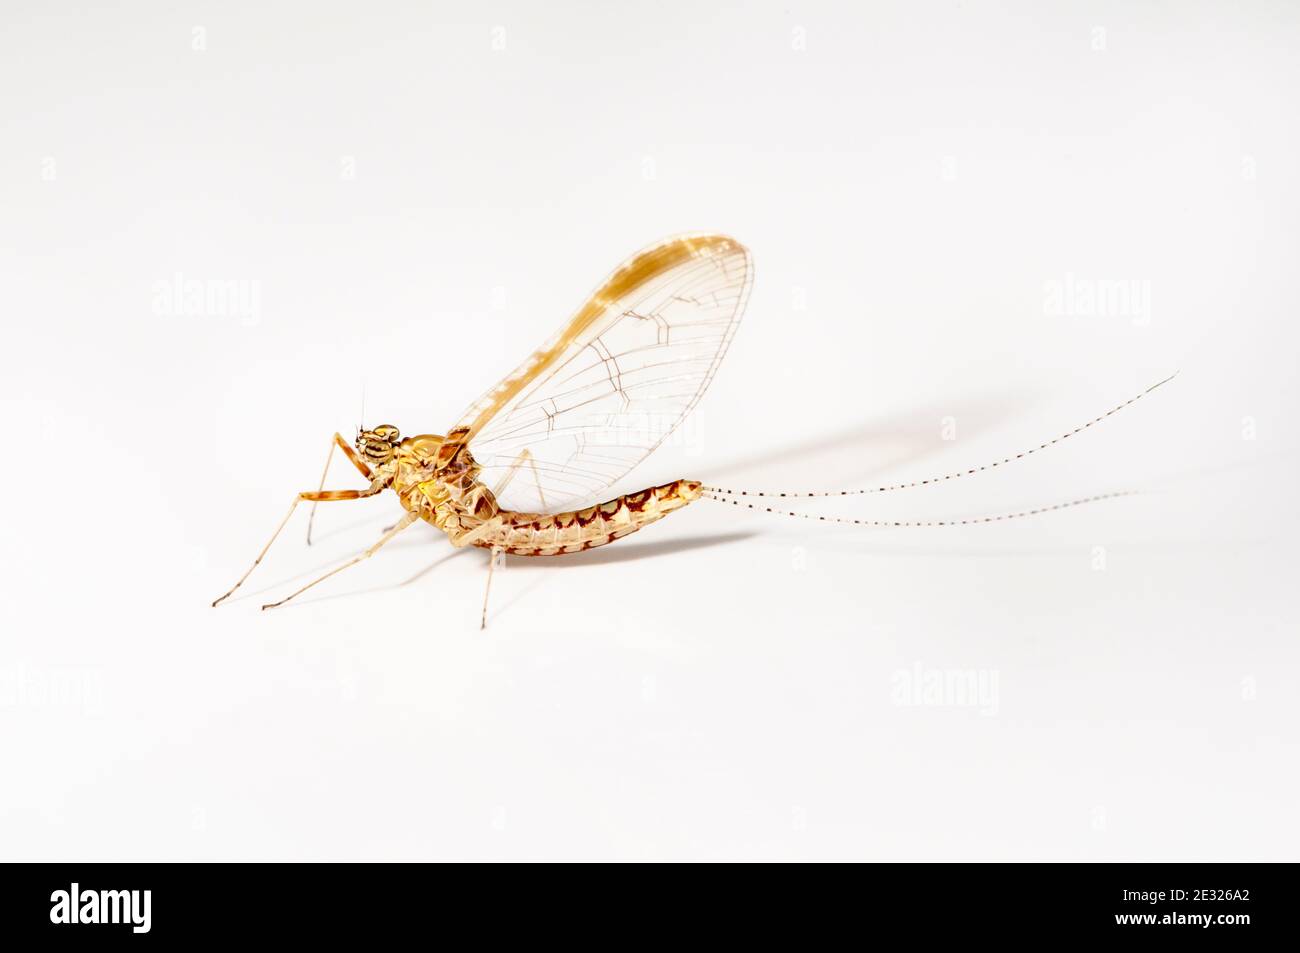 A spinner of the pond olive mayfly (Cloeon dipterum) photographed on a white background in Sowerby, Thirsk, North Yorkshire. July. Stock Photo